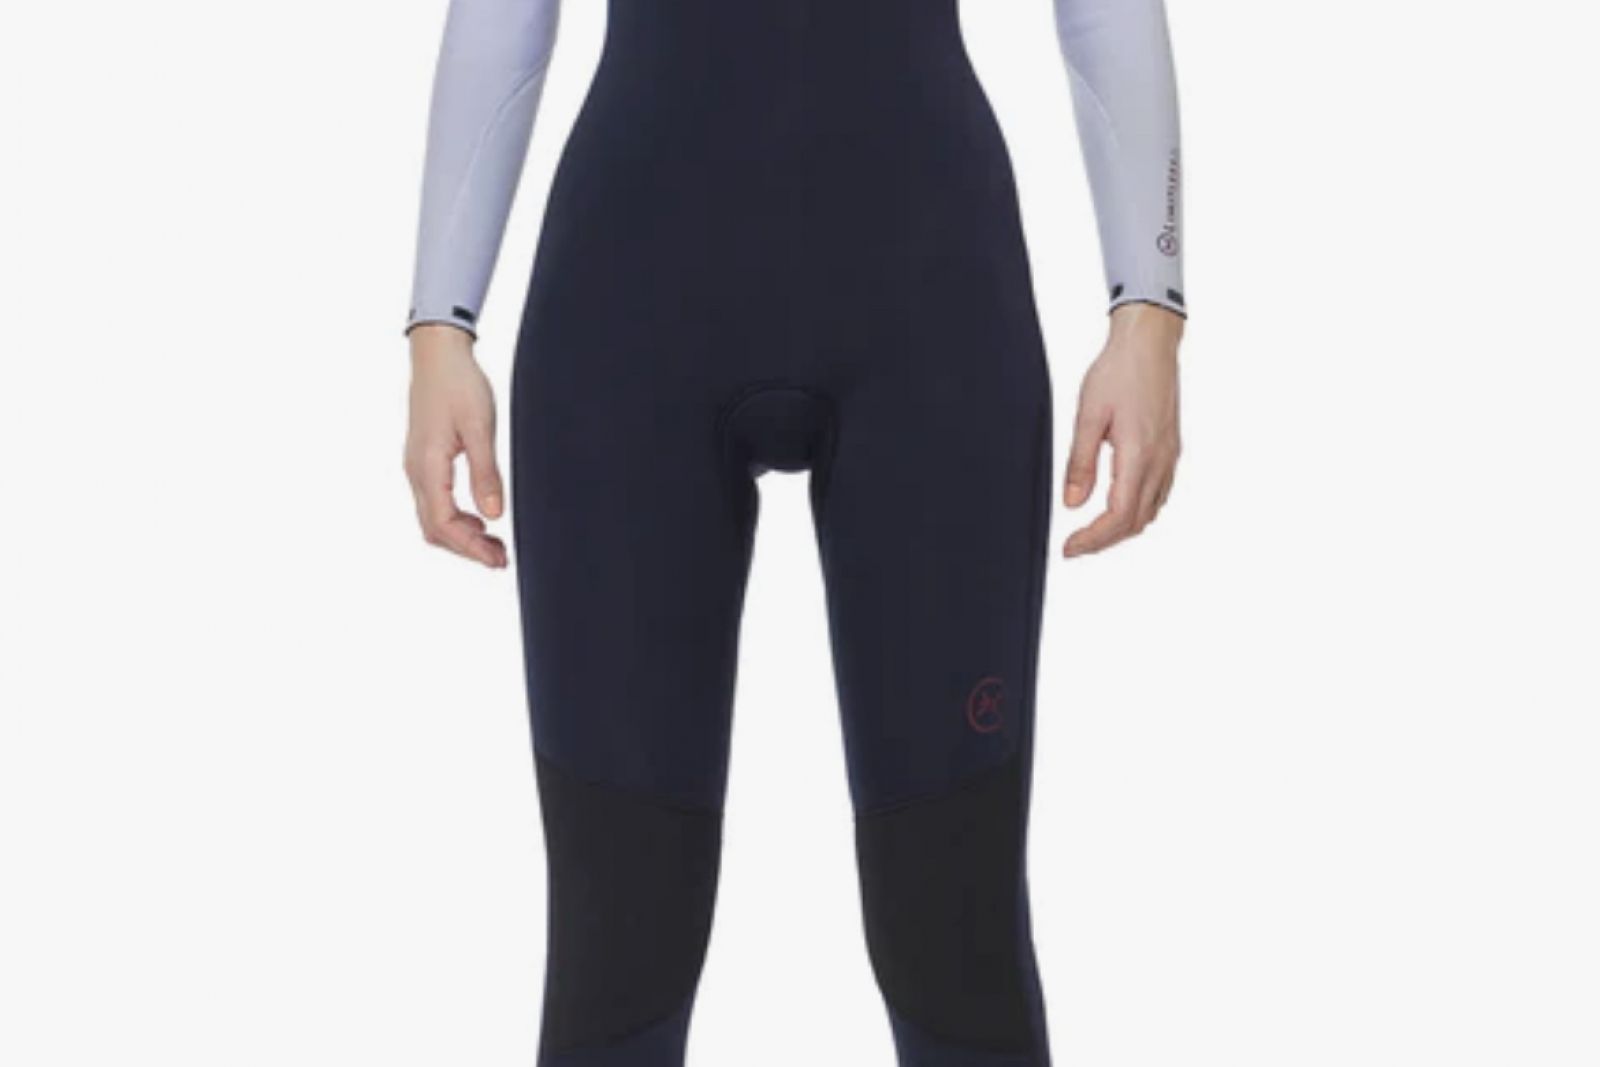 Deeply Wetsuits